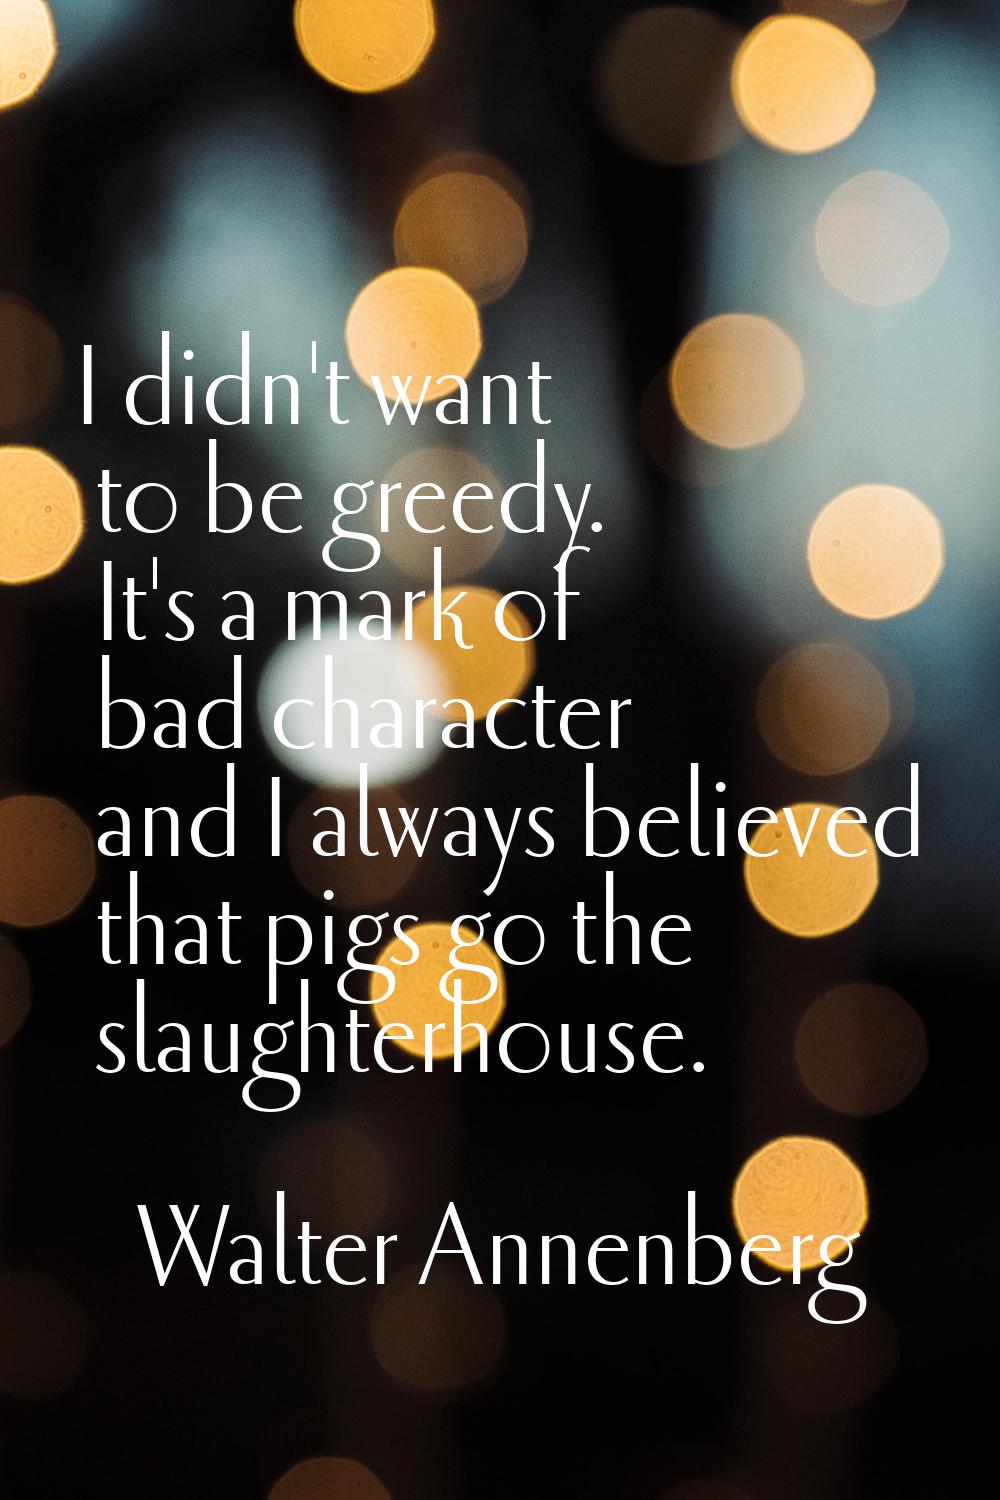 I didn't want to be greedy. It's a mark of bad character and I always believed that pigs go the sla